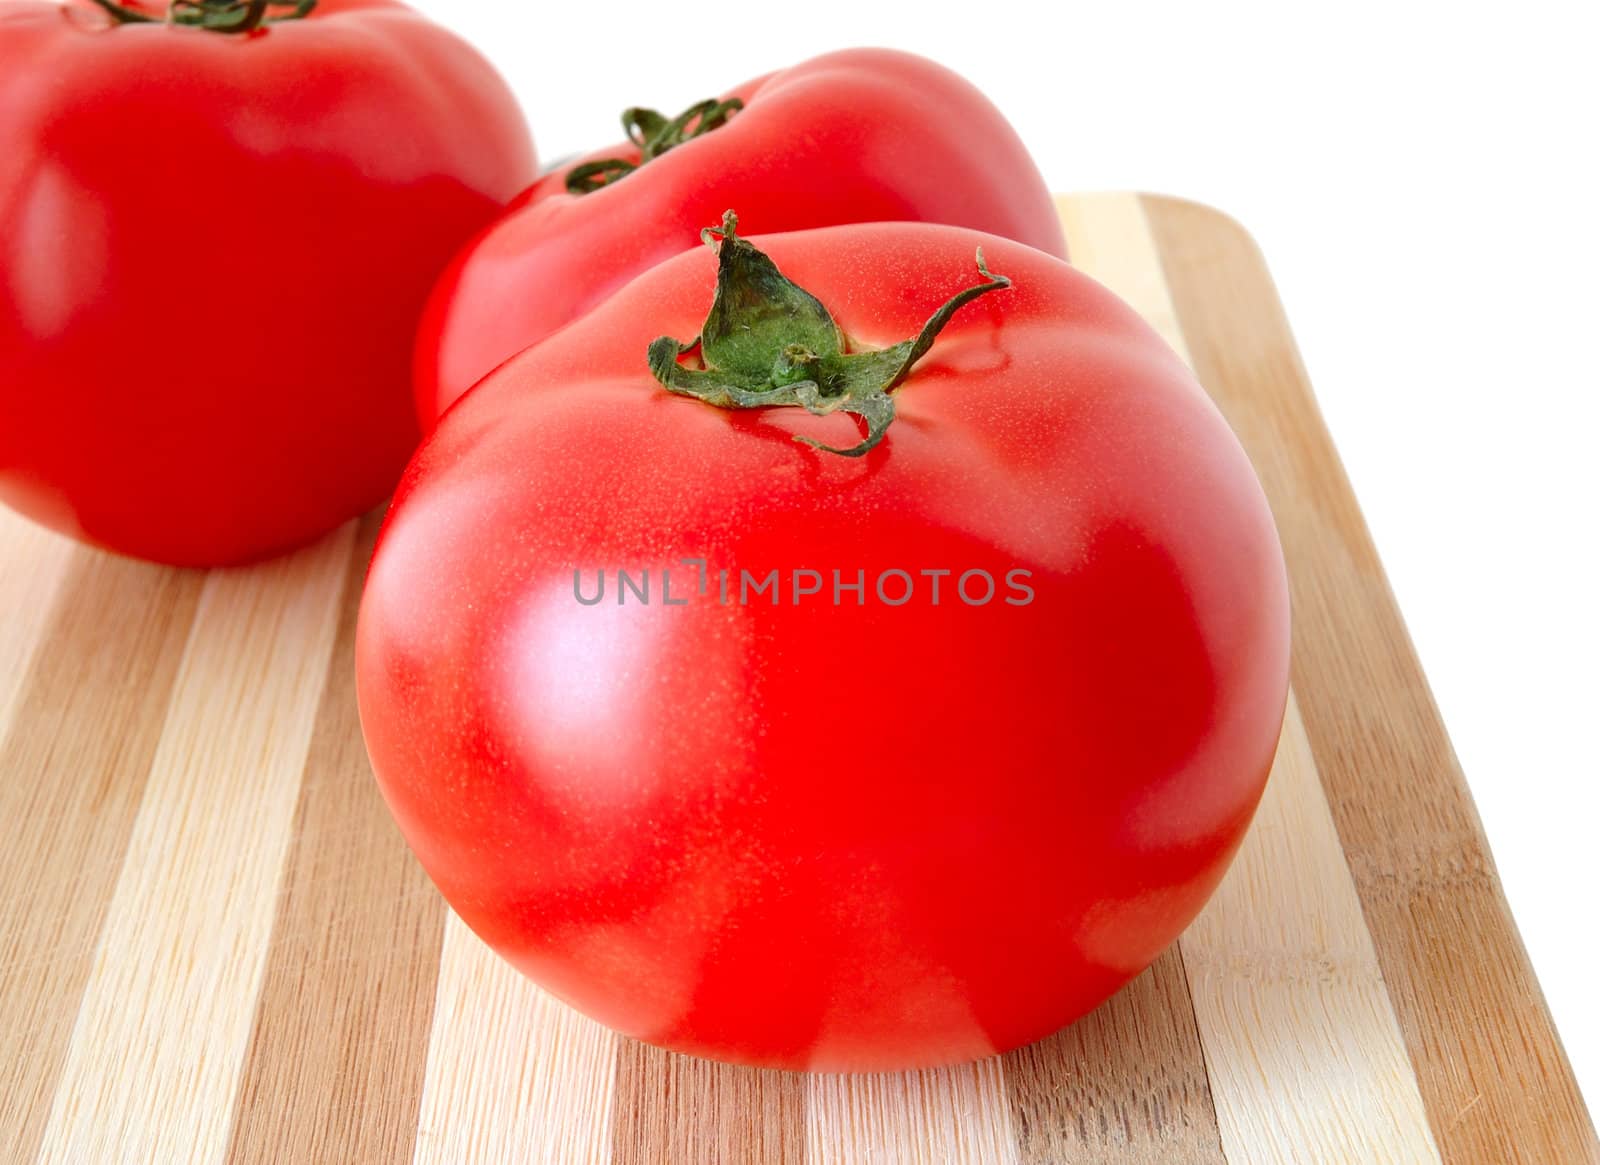 Vegetables (few tomatos) on bamboo cutting board.